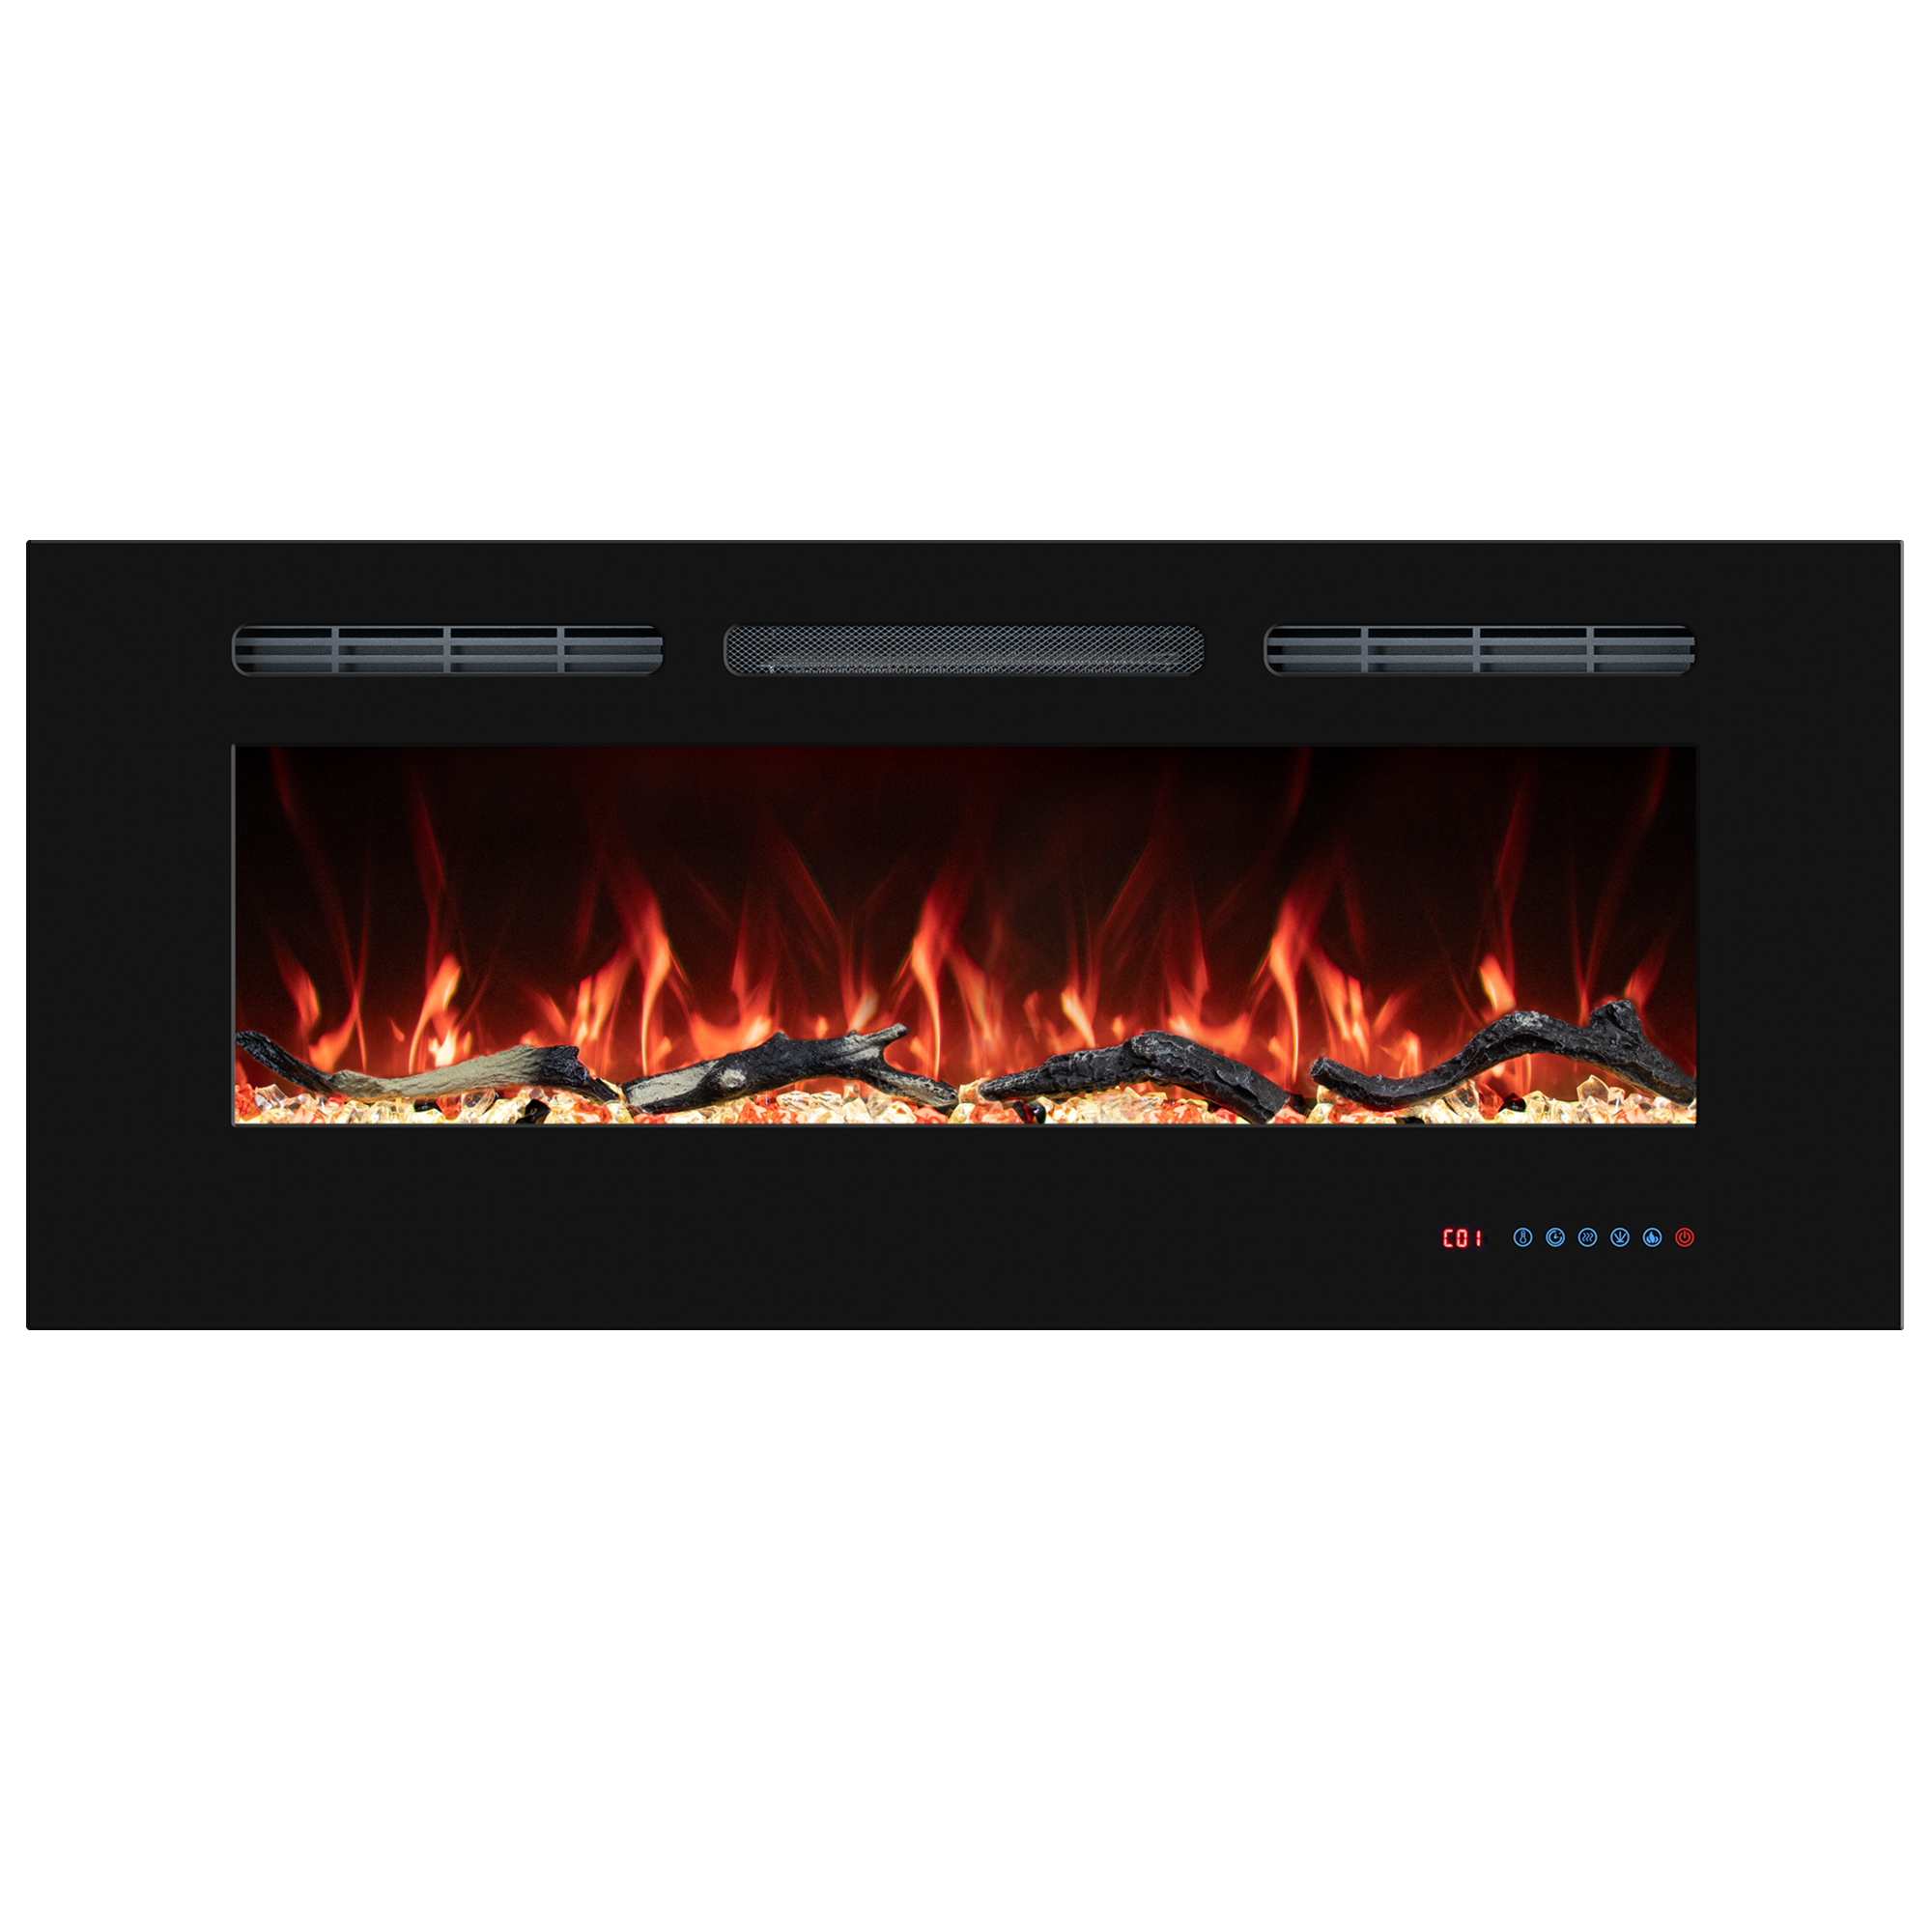 Valuxhome Electric Fireplace Inserts with Multicolor Flame, Log & Crystal